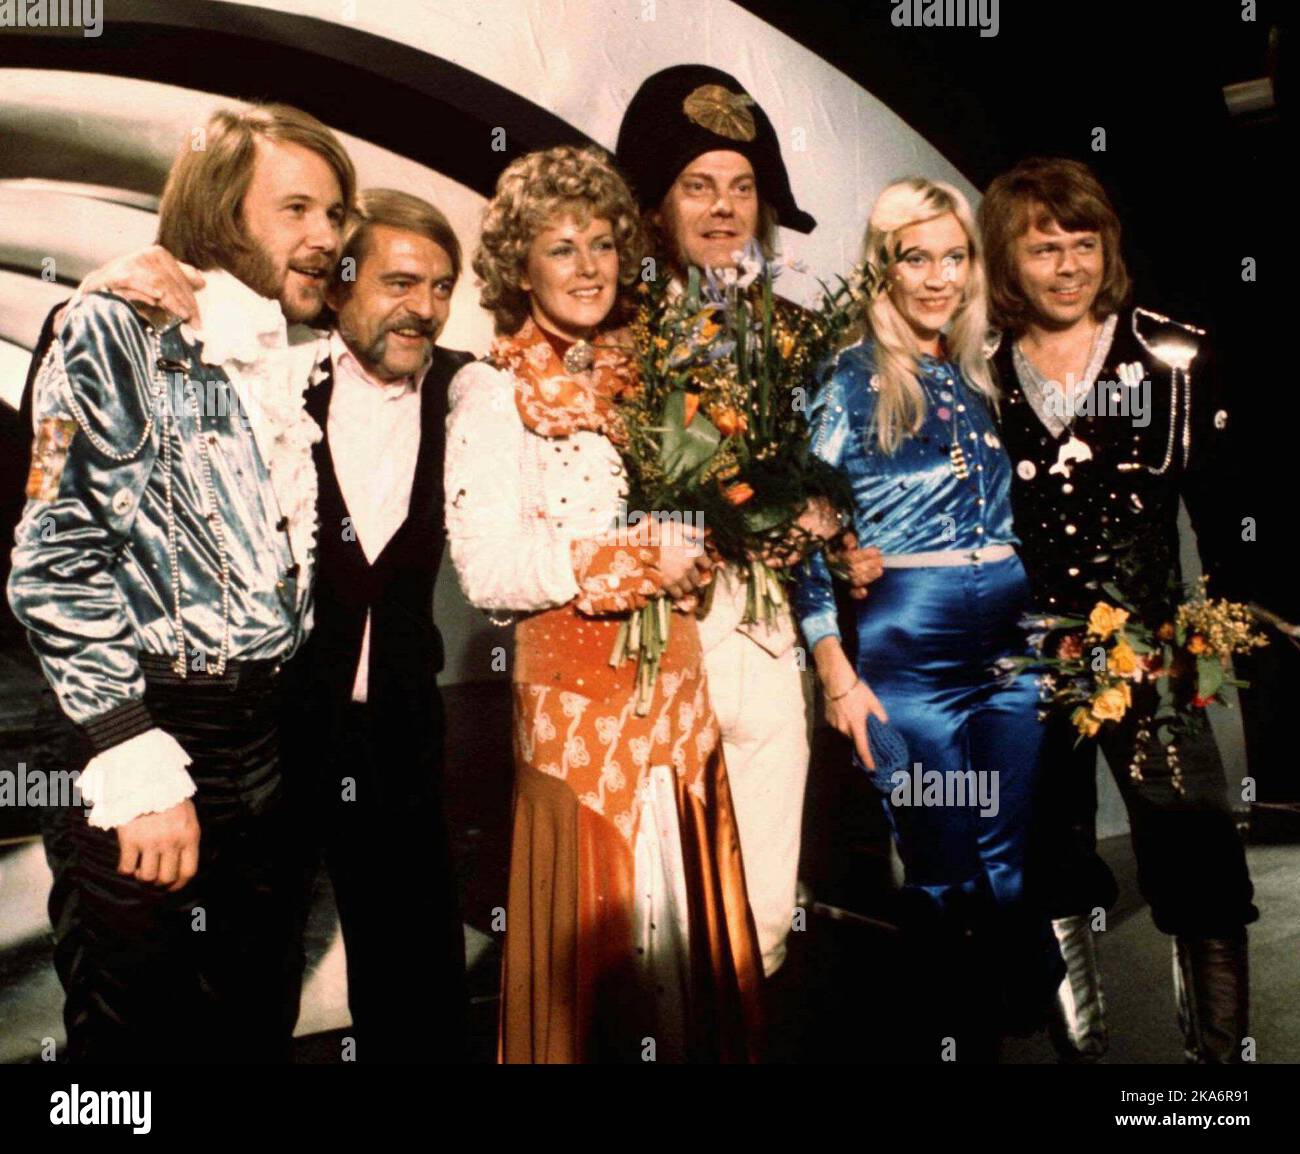 FILE - In this April 6, 1974 file photo, members of Swedish group ABBA and close associates celebrate the victory of their song 'Waterloo' in the Eurovision Song Contest in Brighton, England. The four members of ABBA, Benny Andersson, left, Annifrid Lyngstad, third left, Agnetha Faltskog, second right, and Bjorn Ulvaeus, right, , second right, were the most successful winners of the Eurovision Song Contest, enjoying unprecedented success after their victory. The final of this year's competition takes place on Saturday, May 14 in the Swedish capital Stockholm. (AP Photo/File) Stock Photo